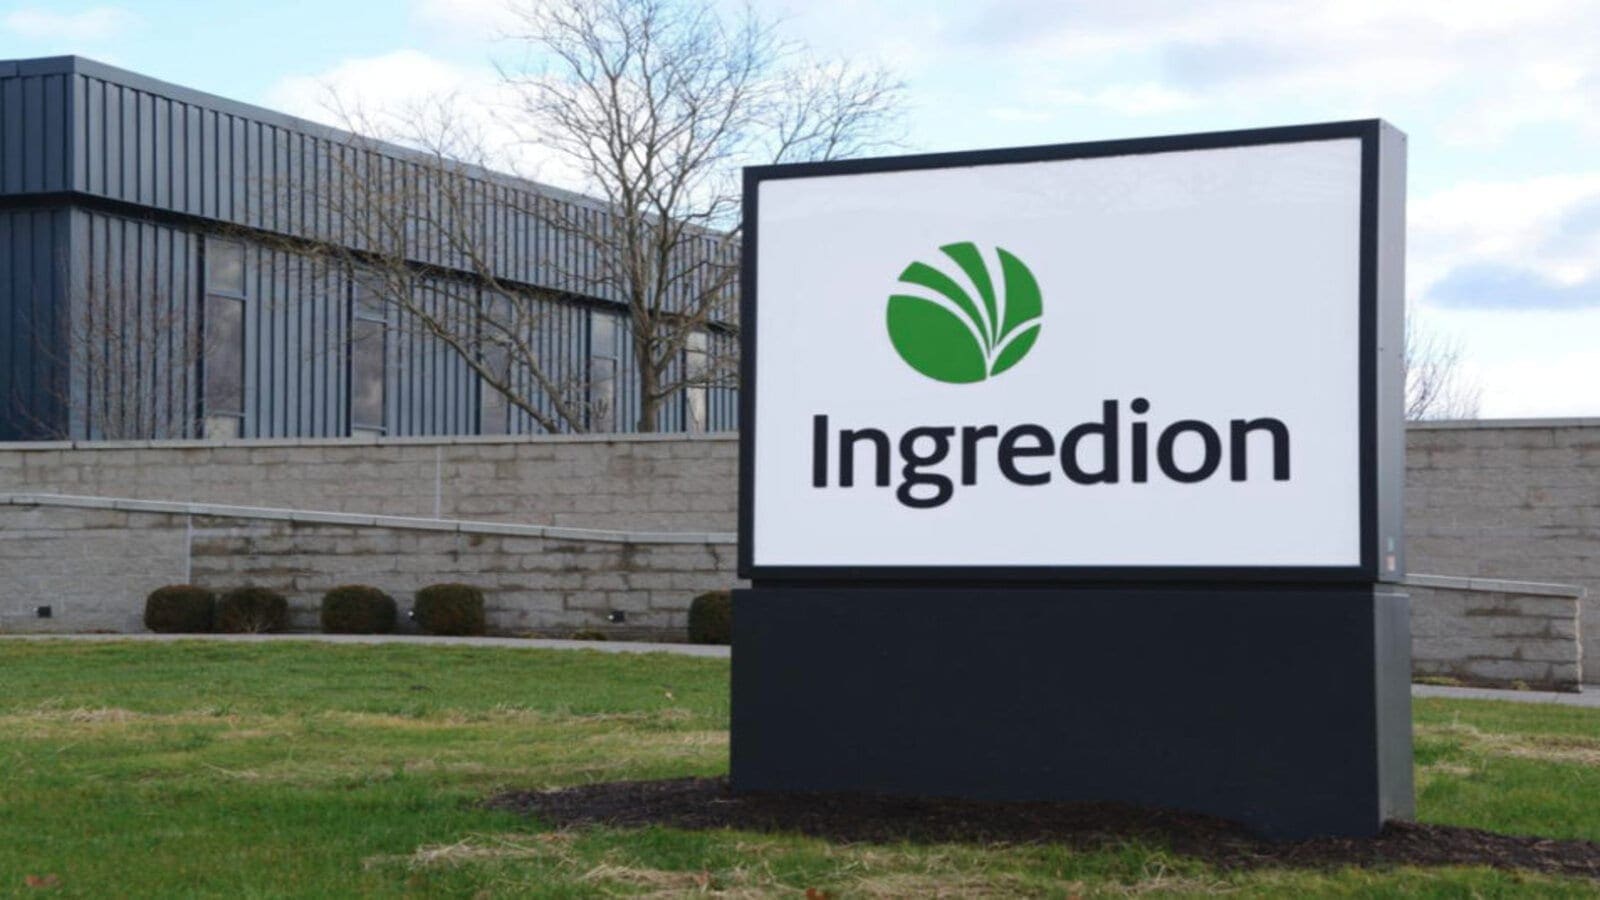 Ingredion’s ability to adjust production to meet shifting consumer demand pays off handsomely in Q2